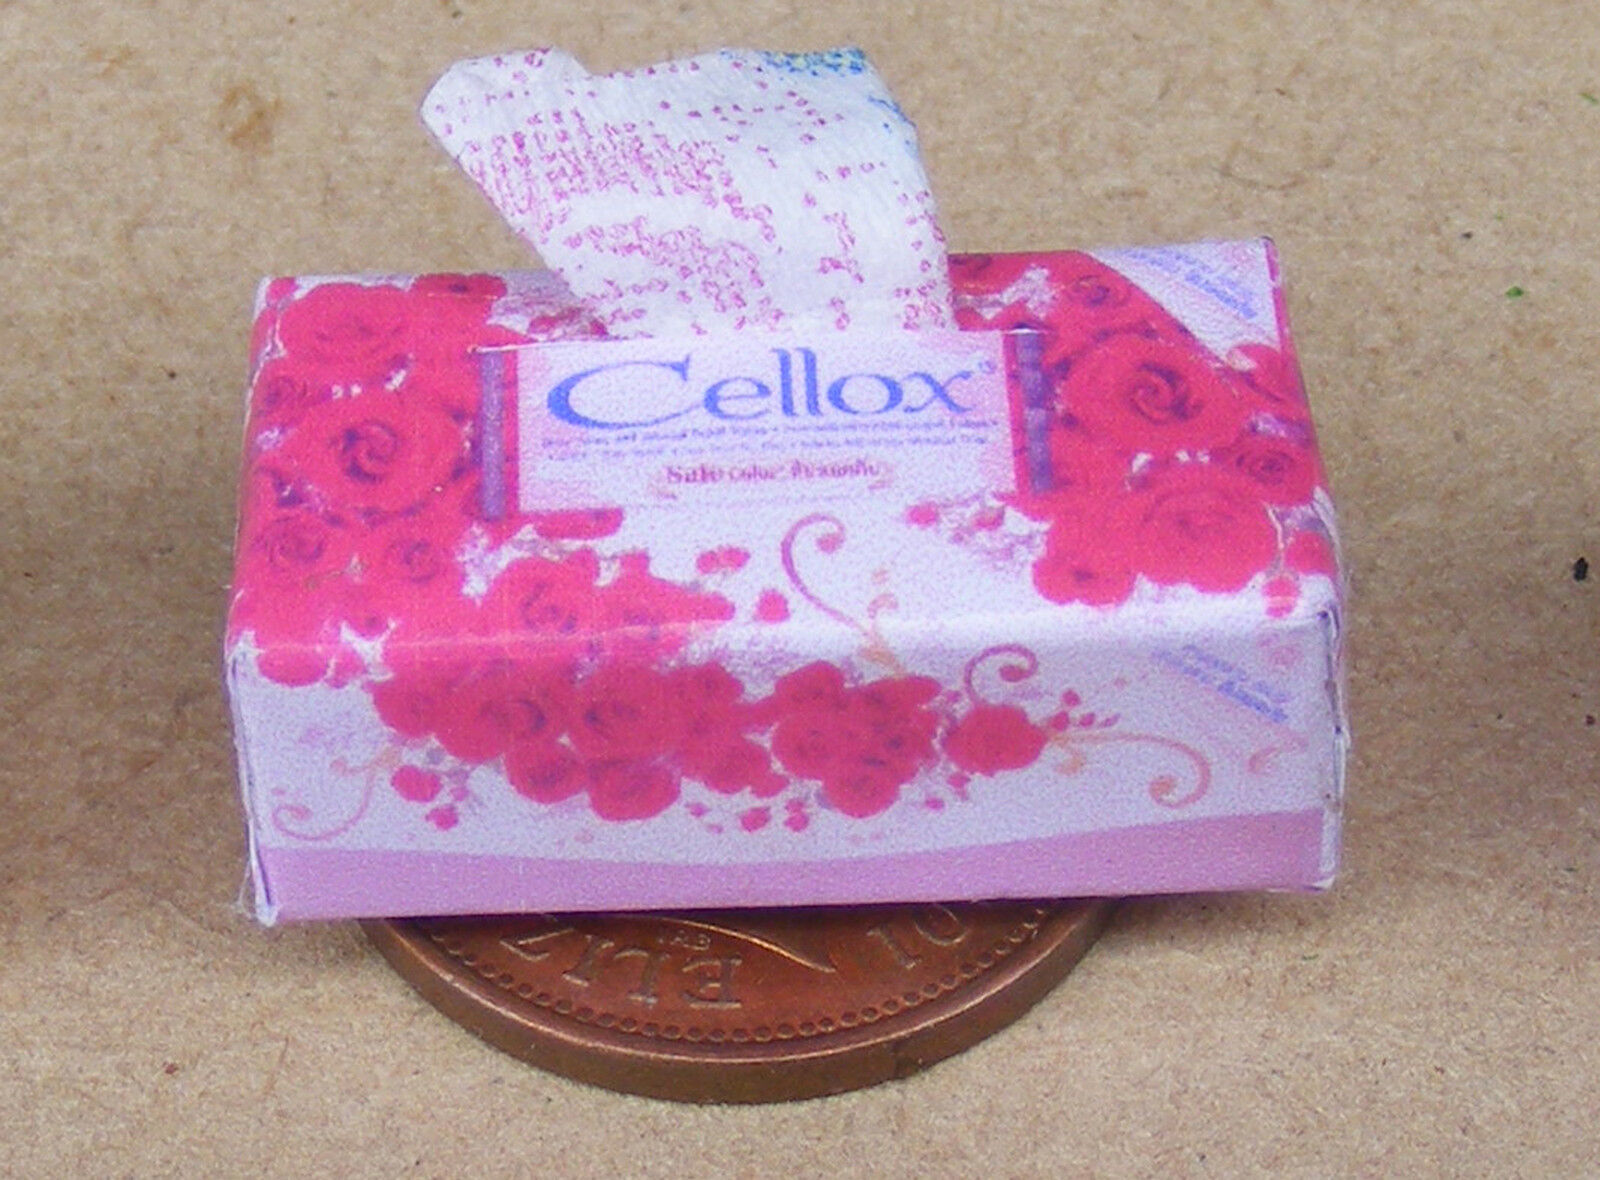 Industry No. 1 Single Some reservation Red Opened Cellox Tissue Box Dolls 1:12 Tumdee Scale Hous